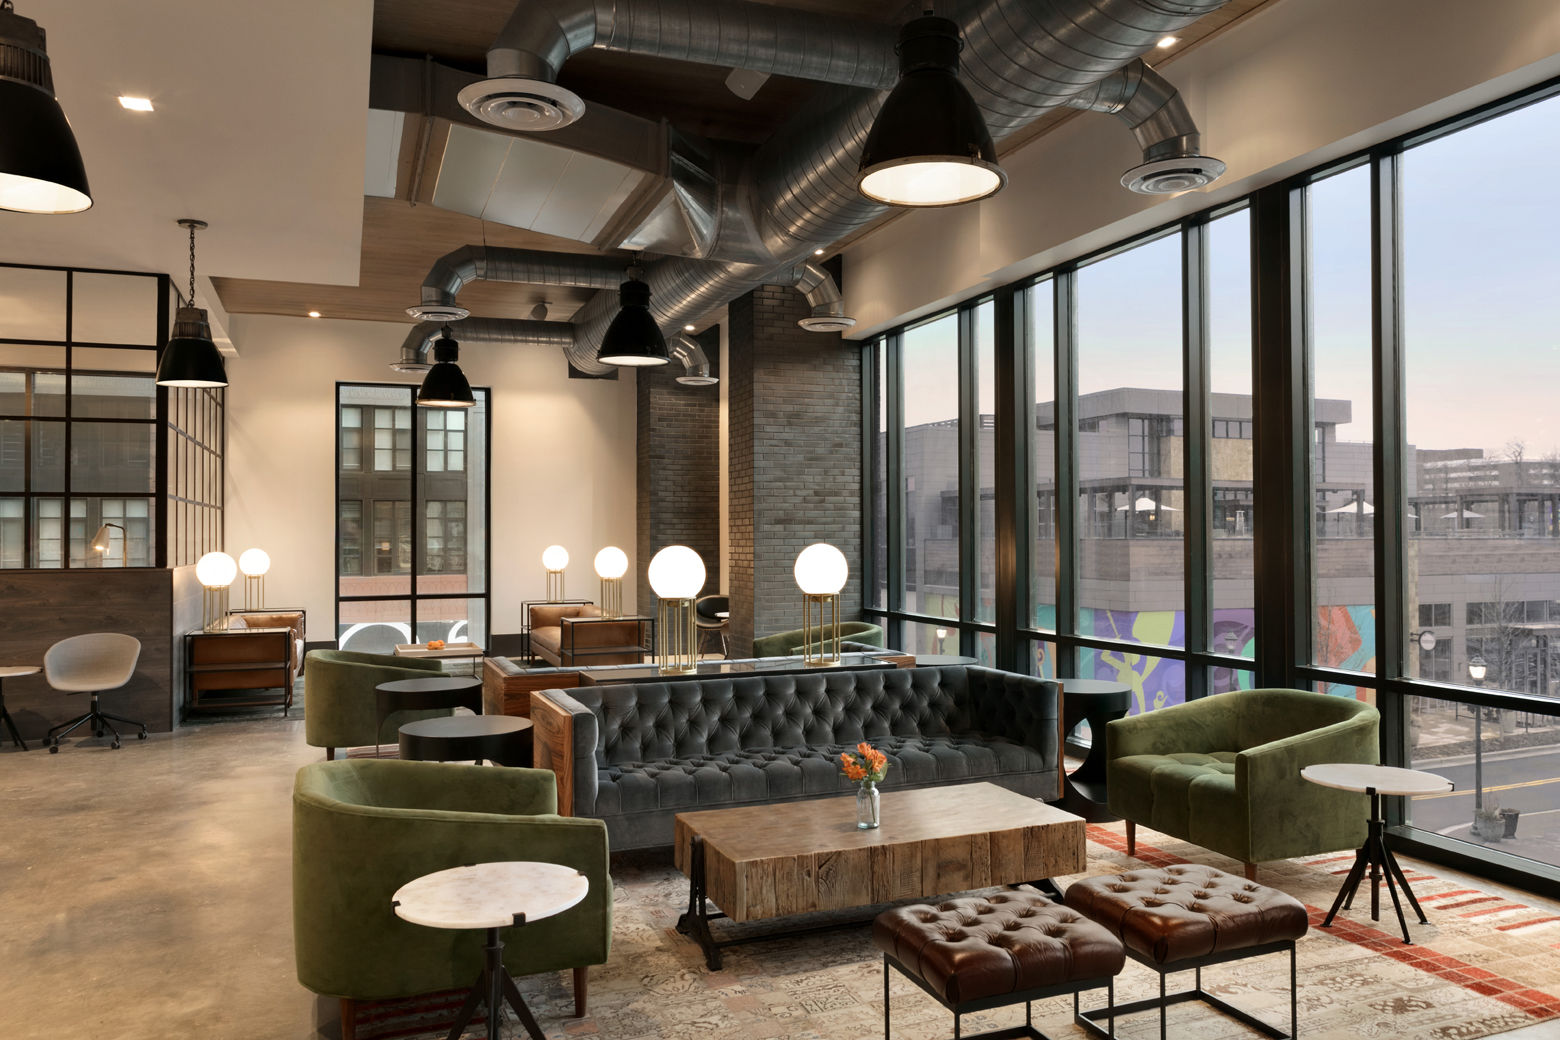 The bar at the Canopy hotel in North Bethesda will offer tastings of craft beers local to Montgomery County. (Courtesy Hilton Hotels)